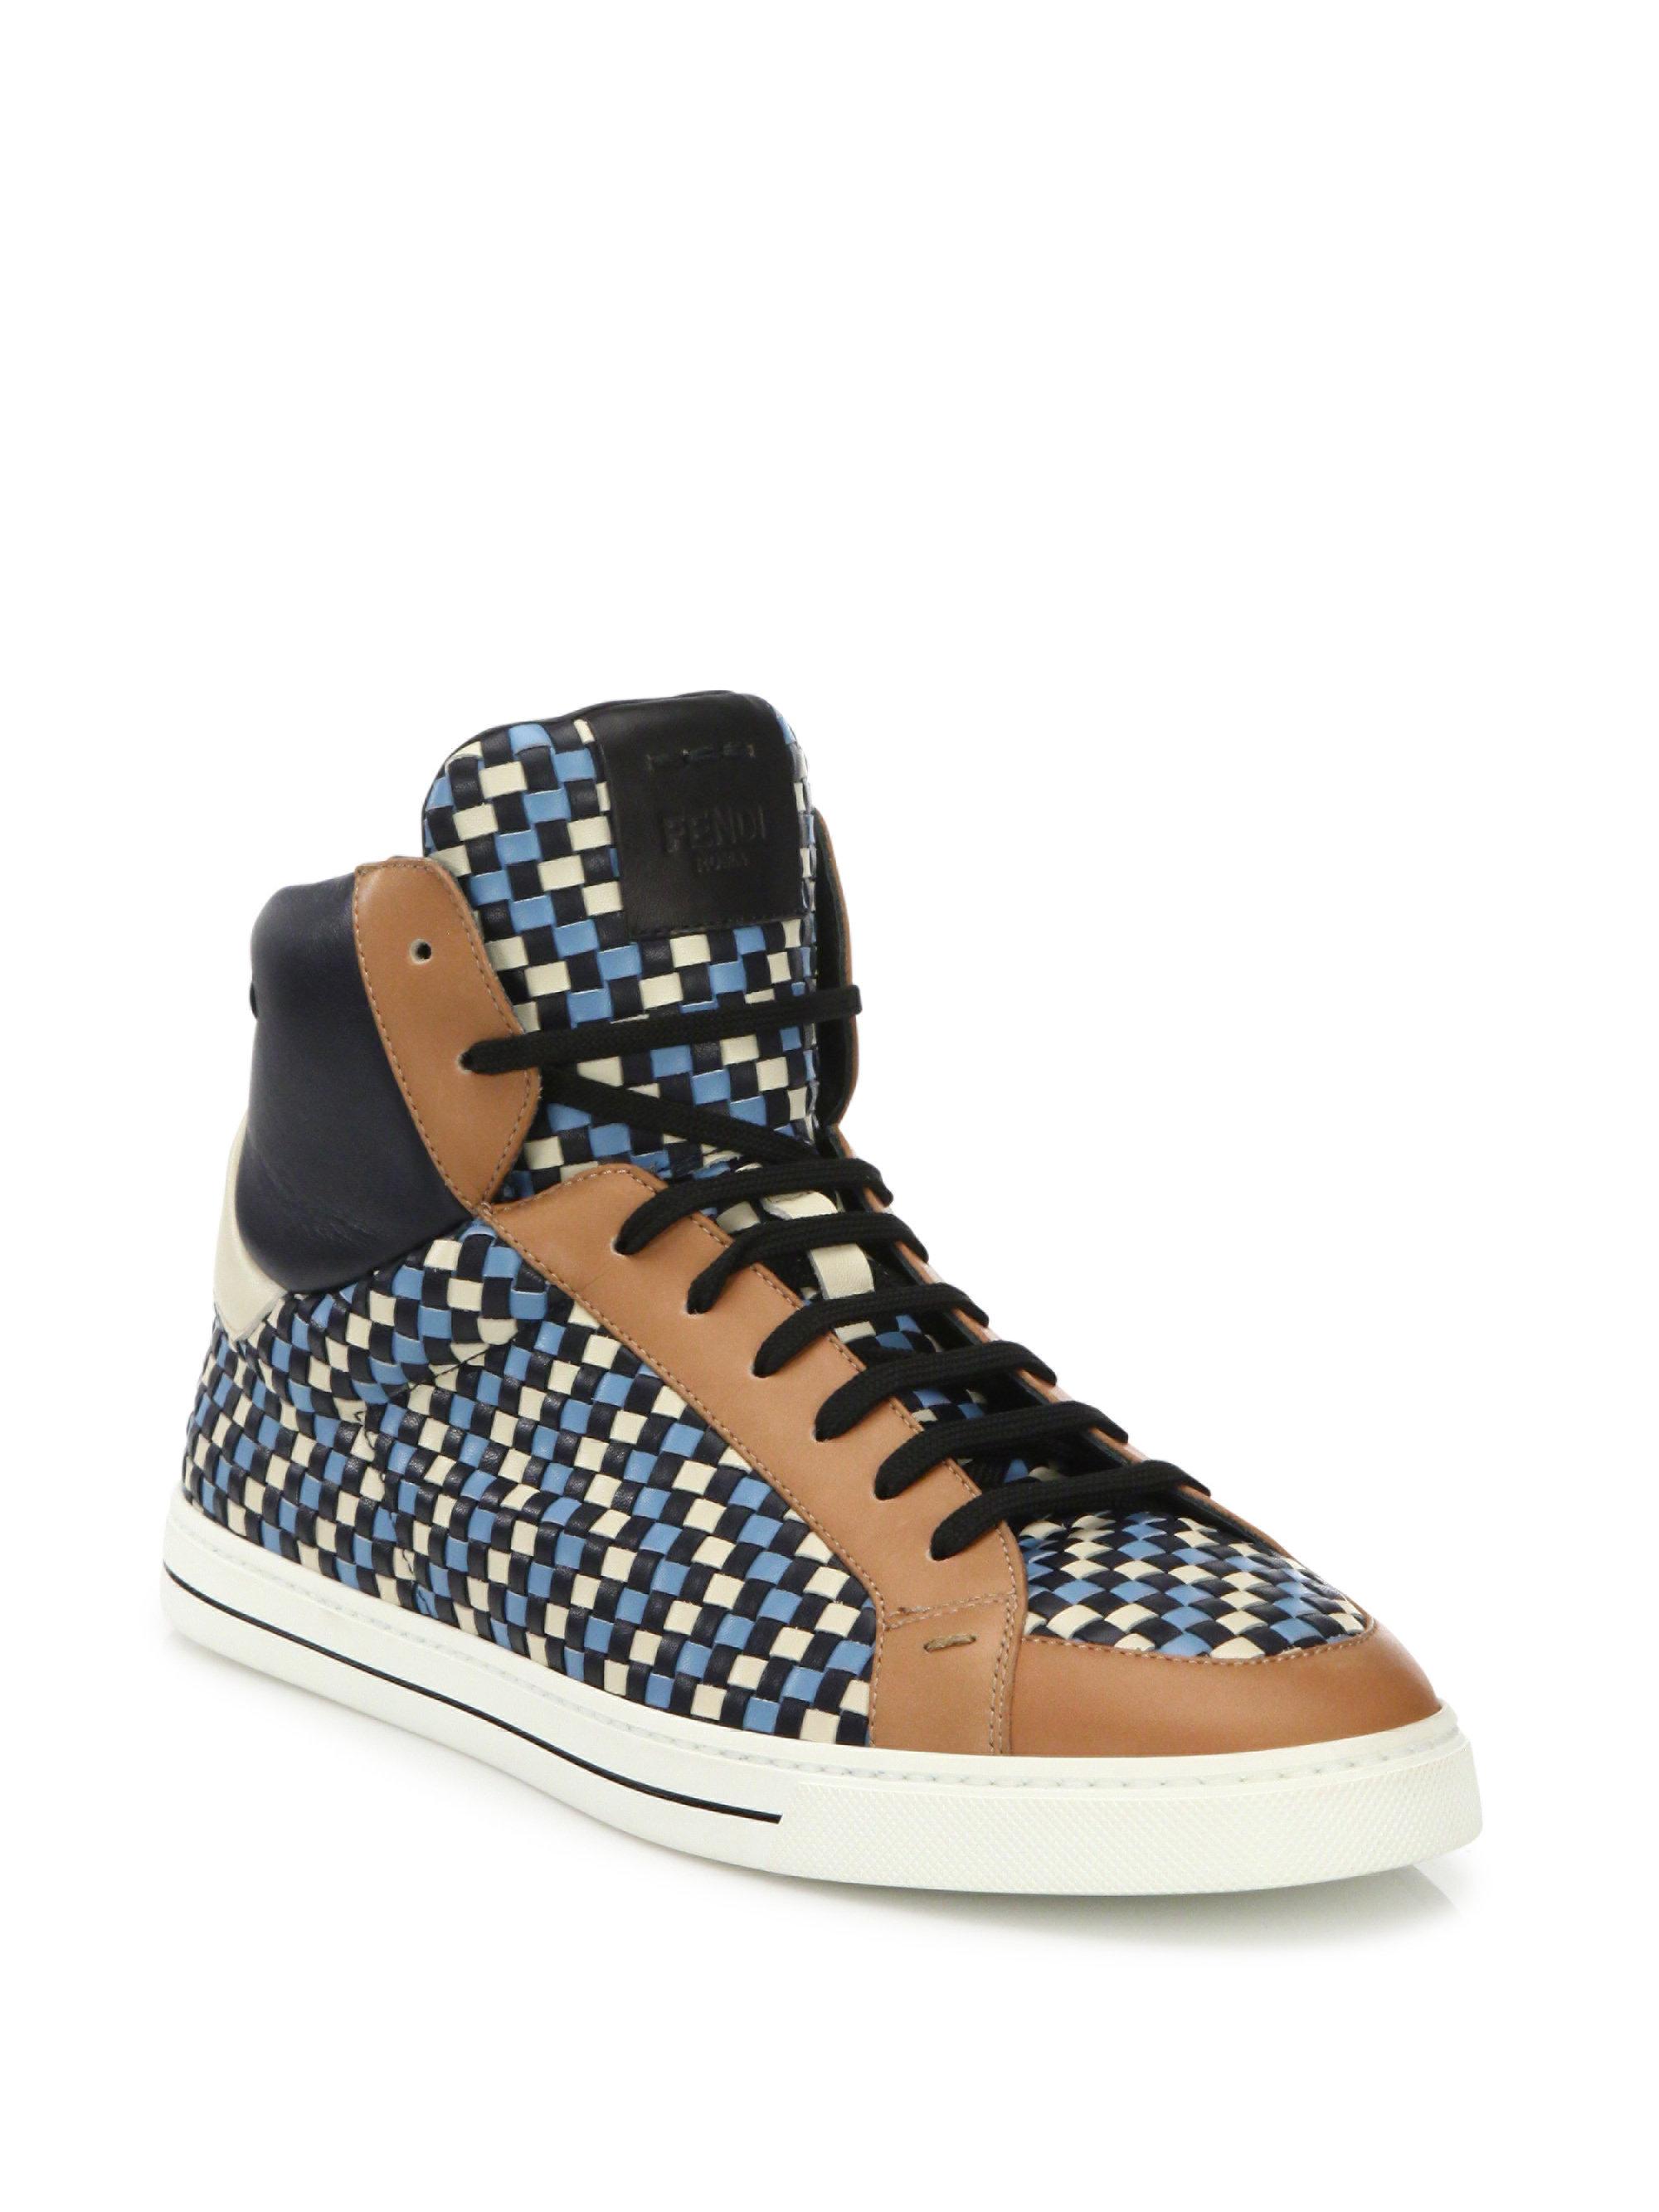 Fendi Multicolor Woven Leather High-top Sneakers - Lyst